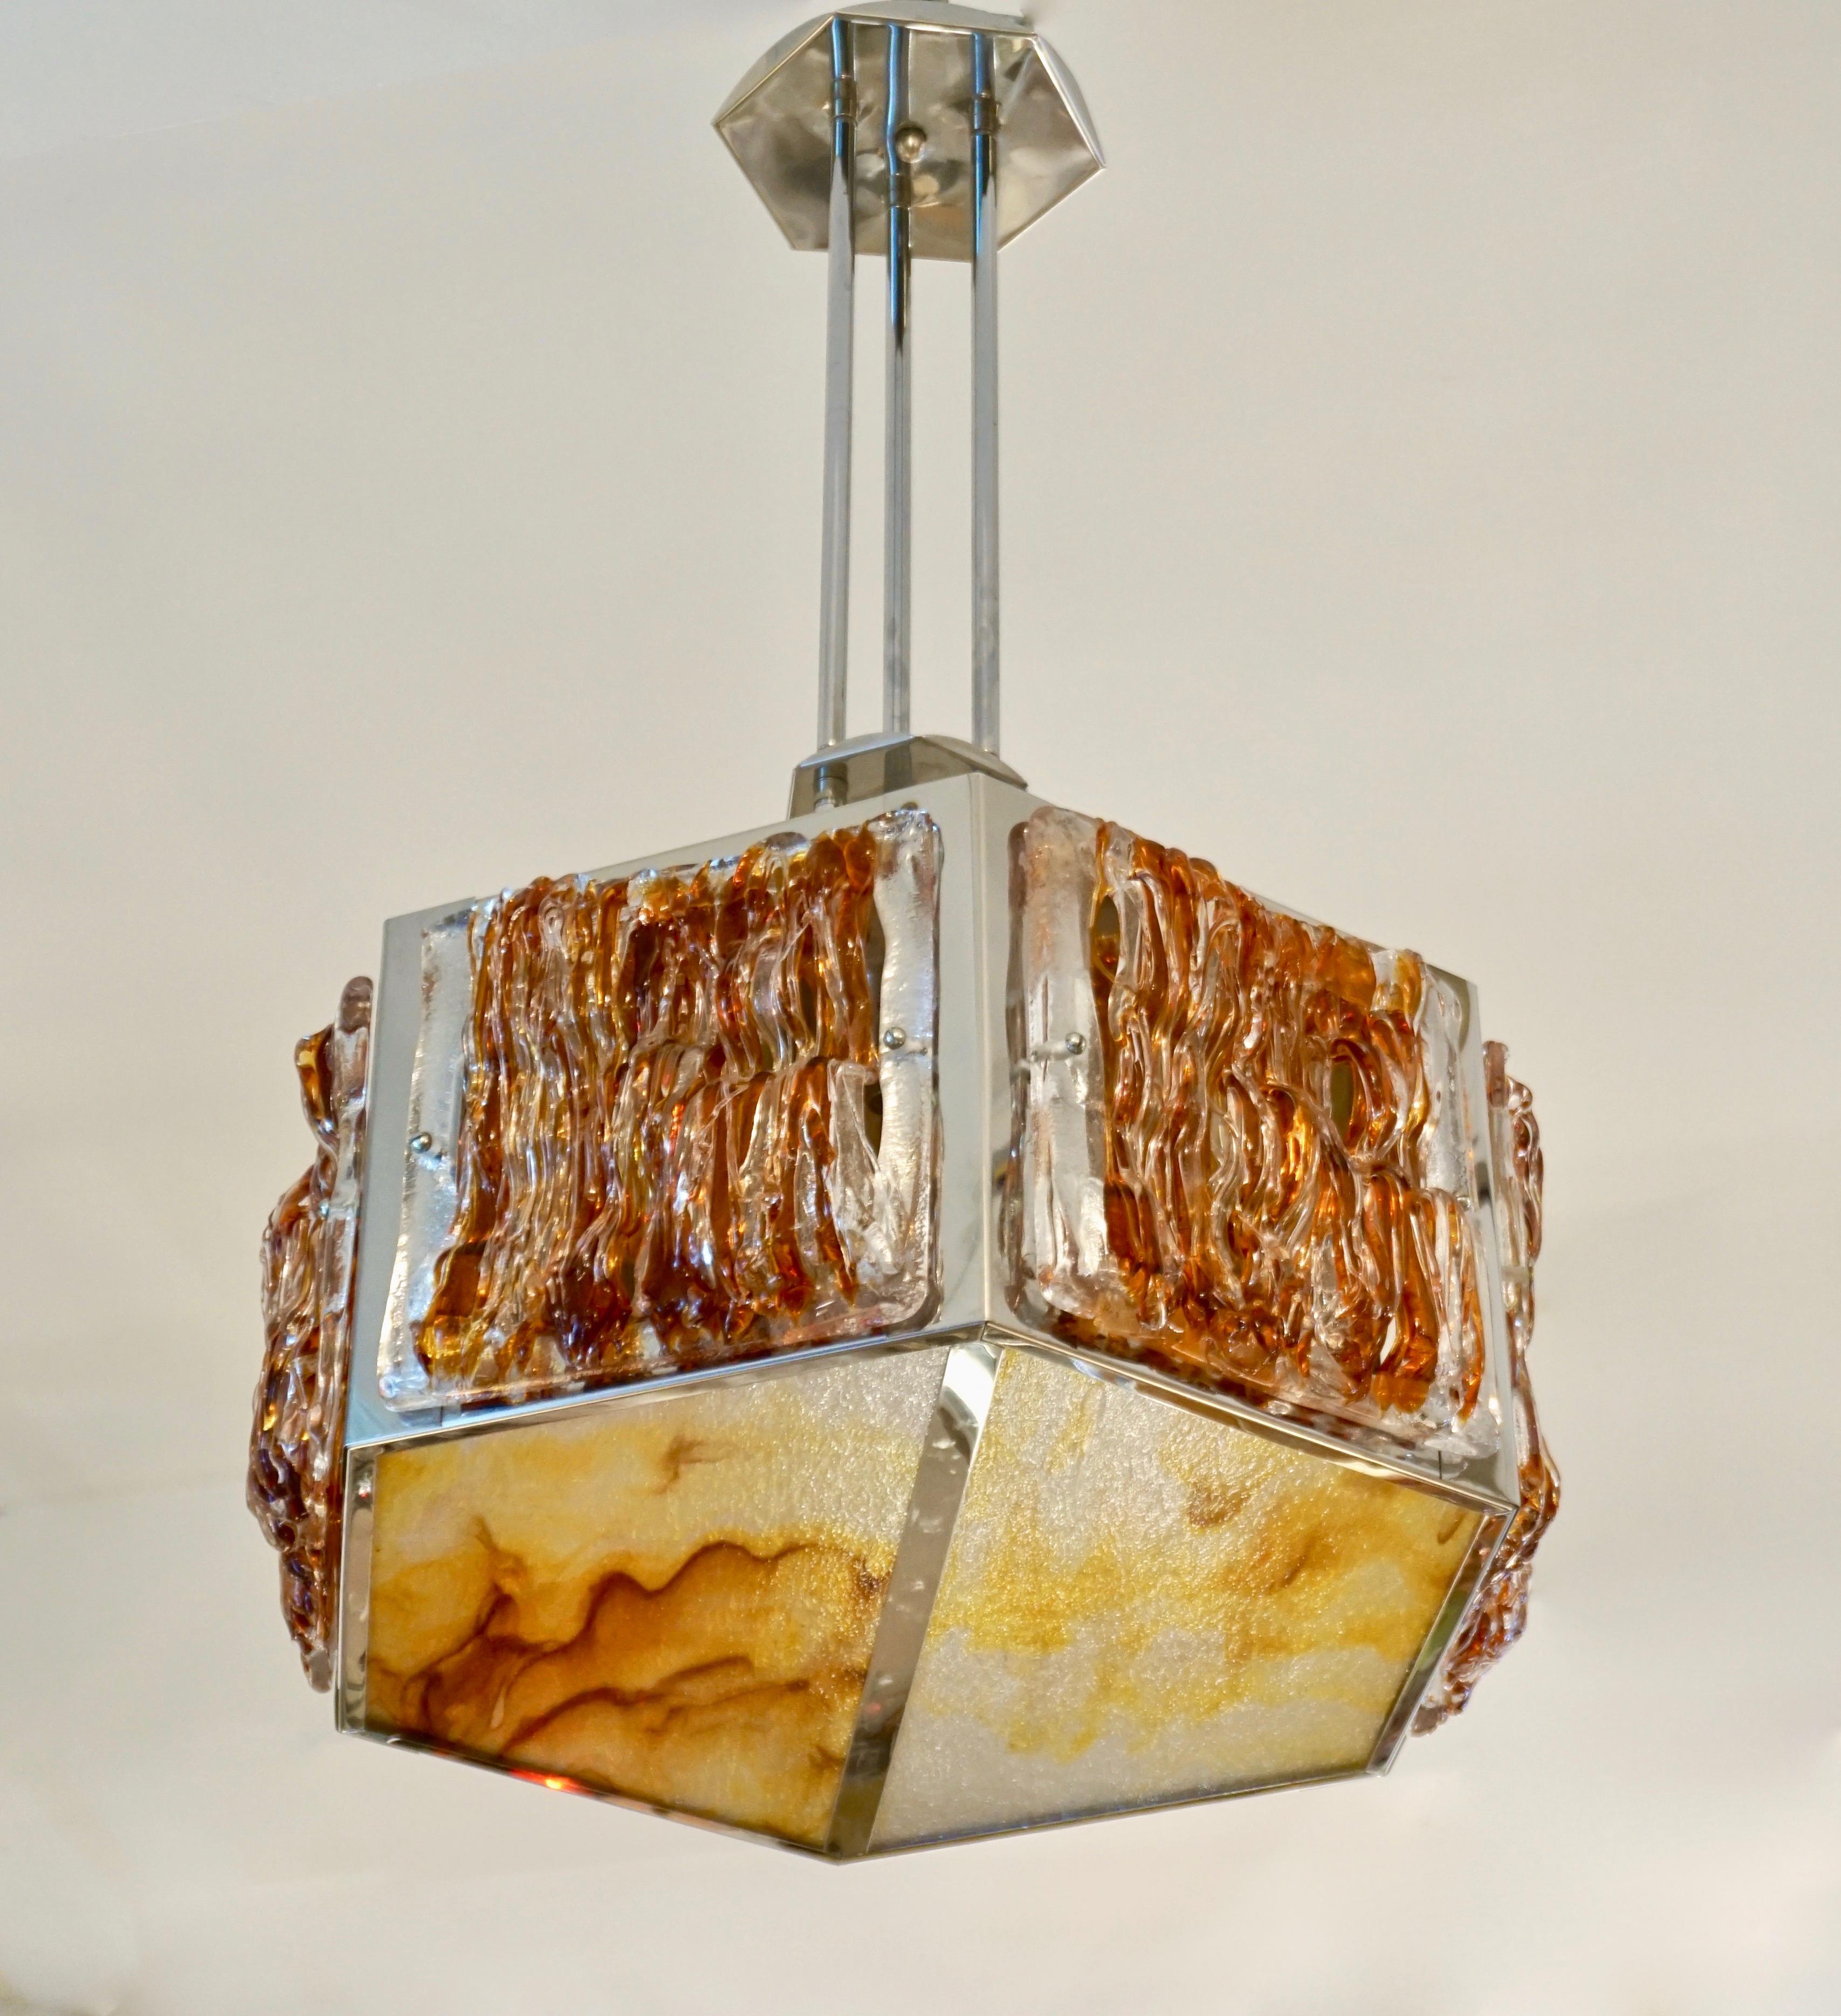 A rare Italian Design Mid-Century Modern chandelier by Mazzega, the nickel structure has a geometric hexagonal shape, repeated in the canopies, with 6 airy organic side panels in crystal clear and orange Murano glass worked in filament fretwork, a